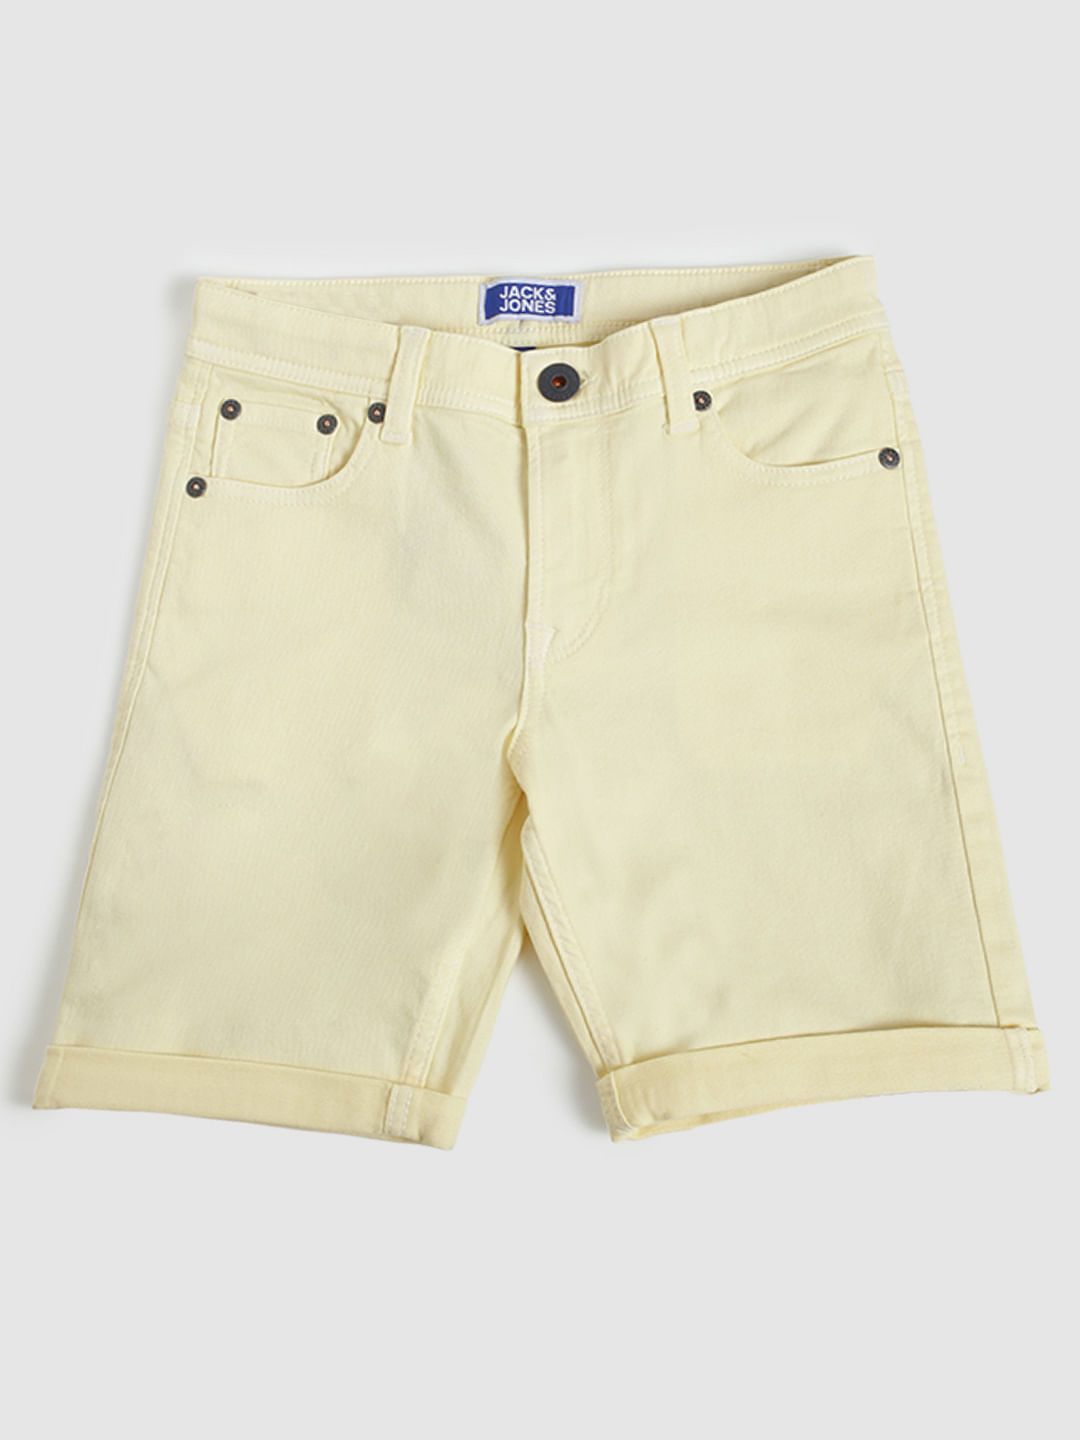 yellow jeans shorts